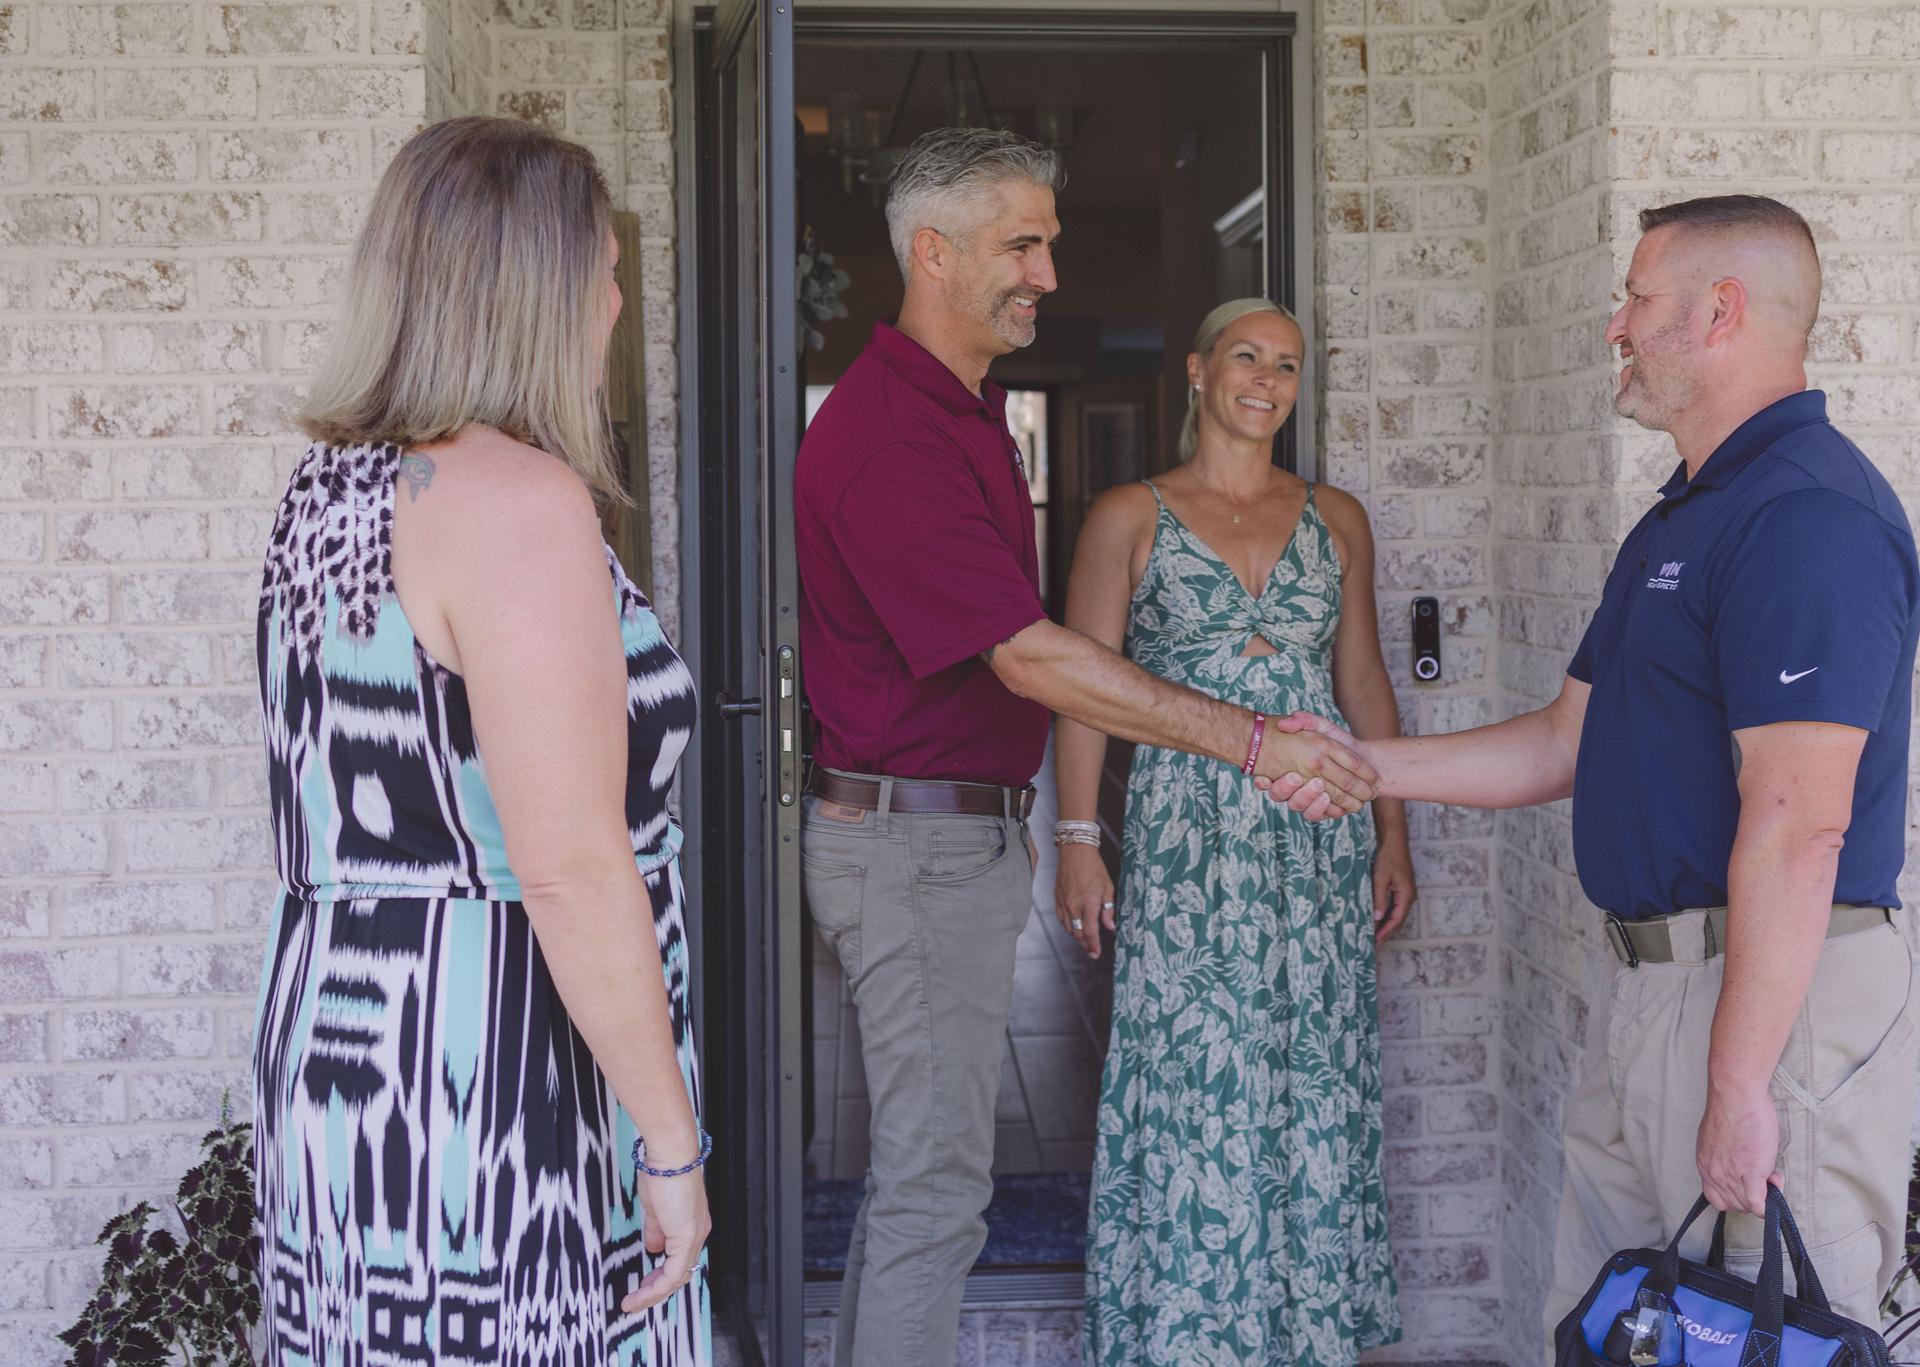 WIN Home Inspector shaking hands with client in front of a house door